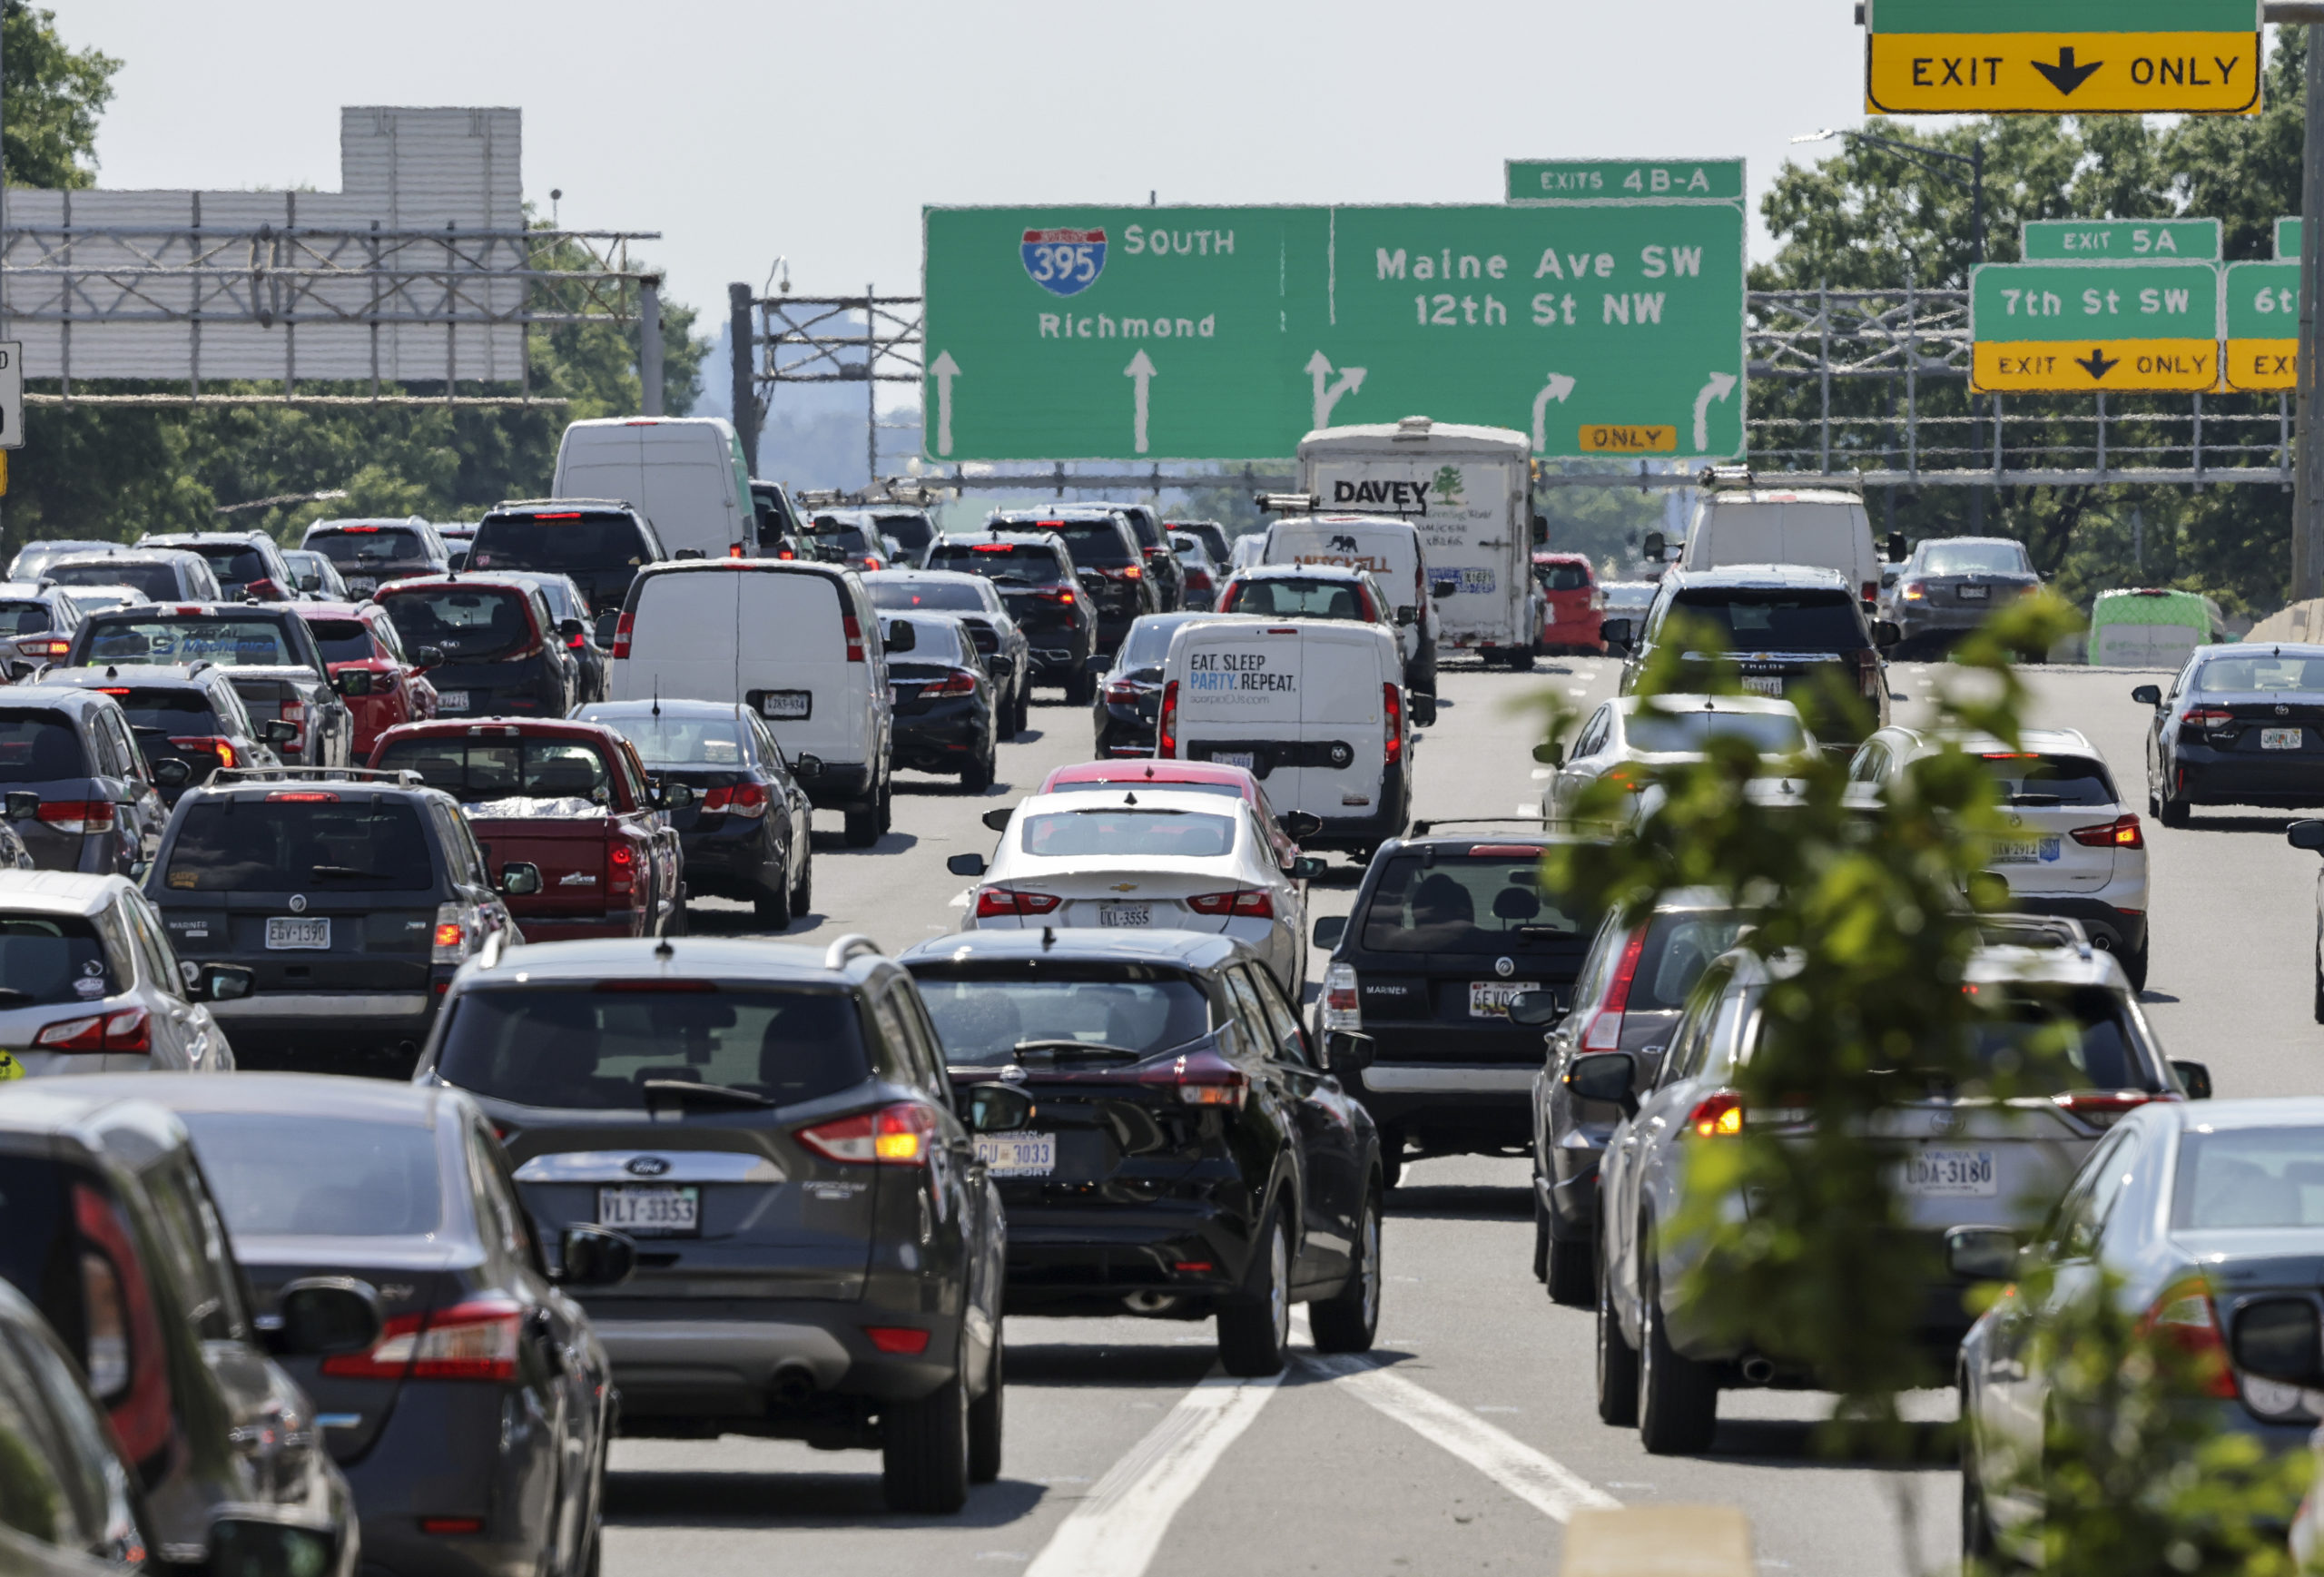 WASHINGTON, DC - JUNE 30: Motorists drive in traffic on Interstate 395, the Southwest Freeway, on June 30, 2022 in Washington, DC. The Fourth of July holiday weekend is expected to see an increase in traffic with an estimated 42 million people expected to take a road trip on the long weekend, according to AAA. (Photo by Kevin Dietsch/Getty Images)